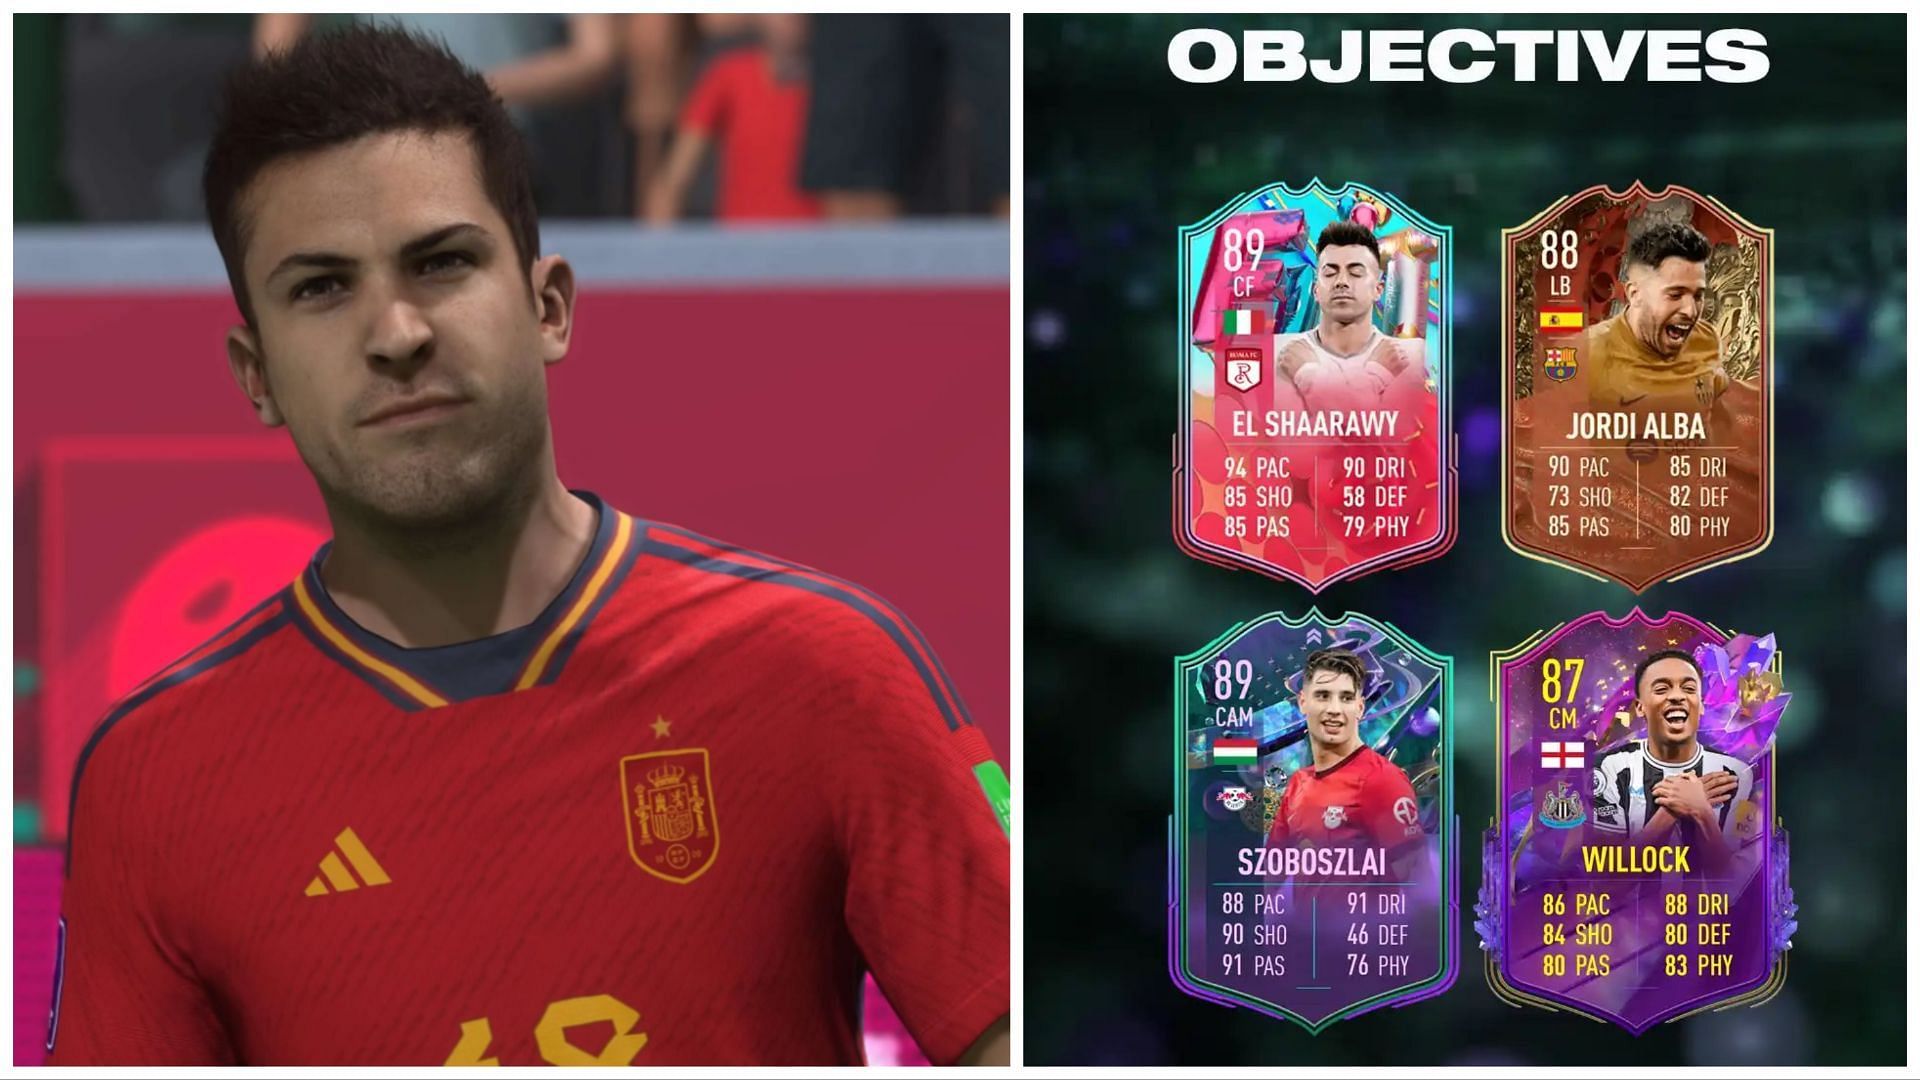 New FIFA 23 objective cards have been leaked (Images via EA Sports and Twitter/NickyCai2)